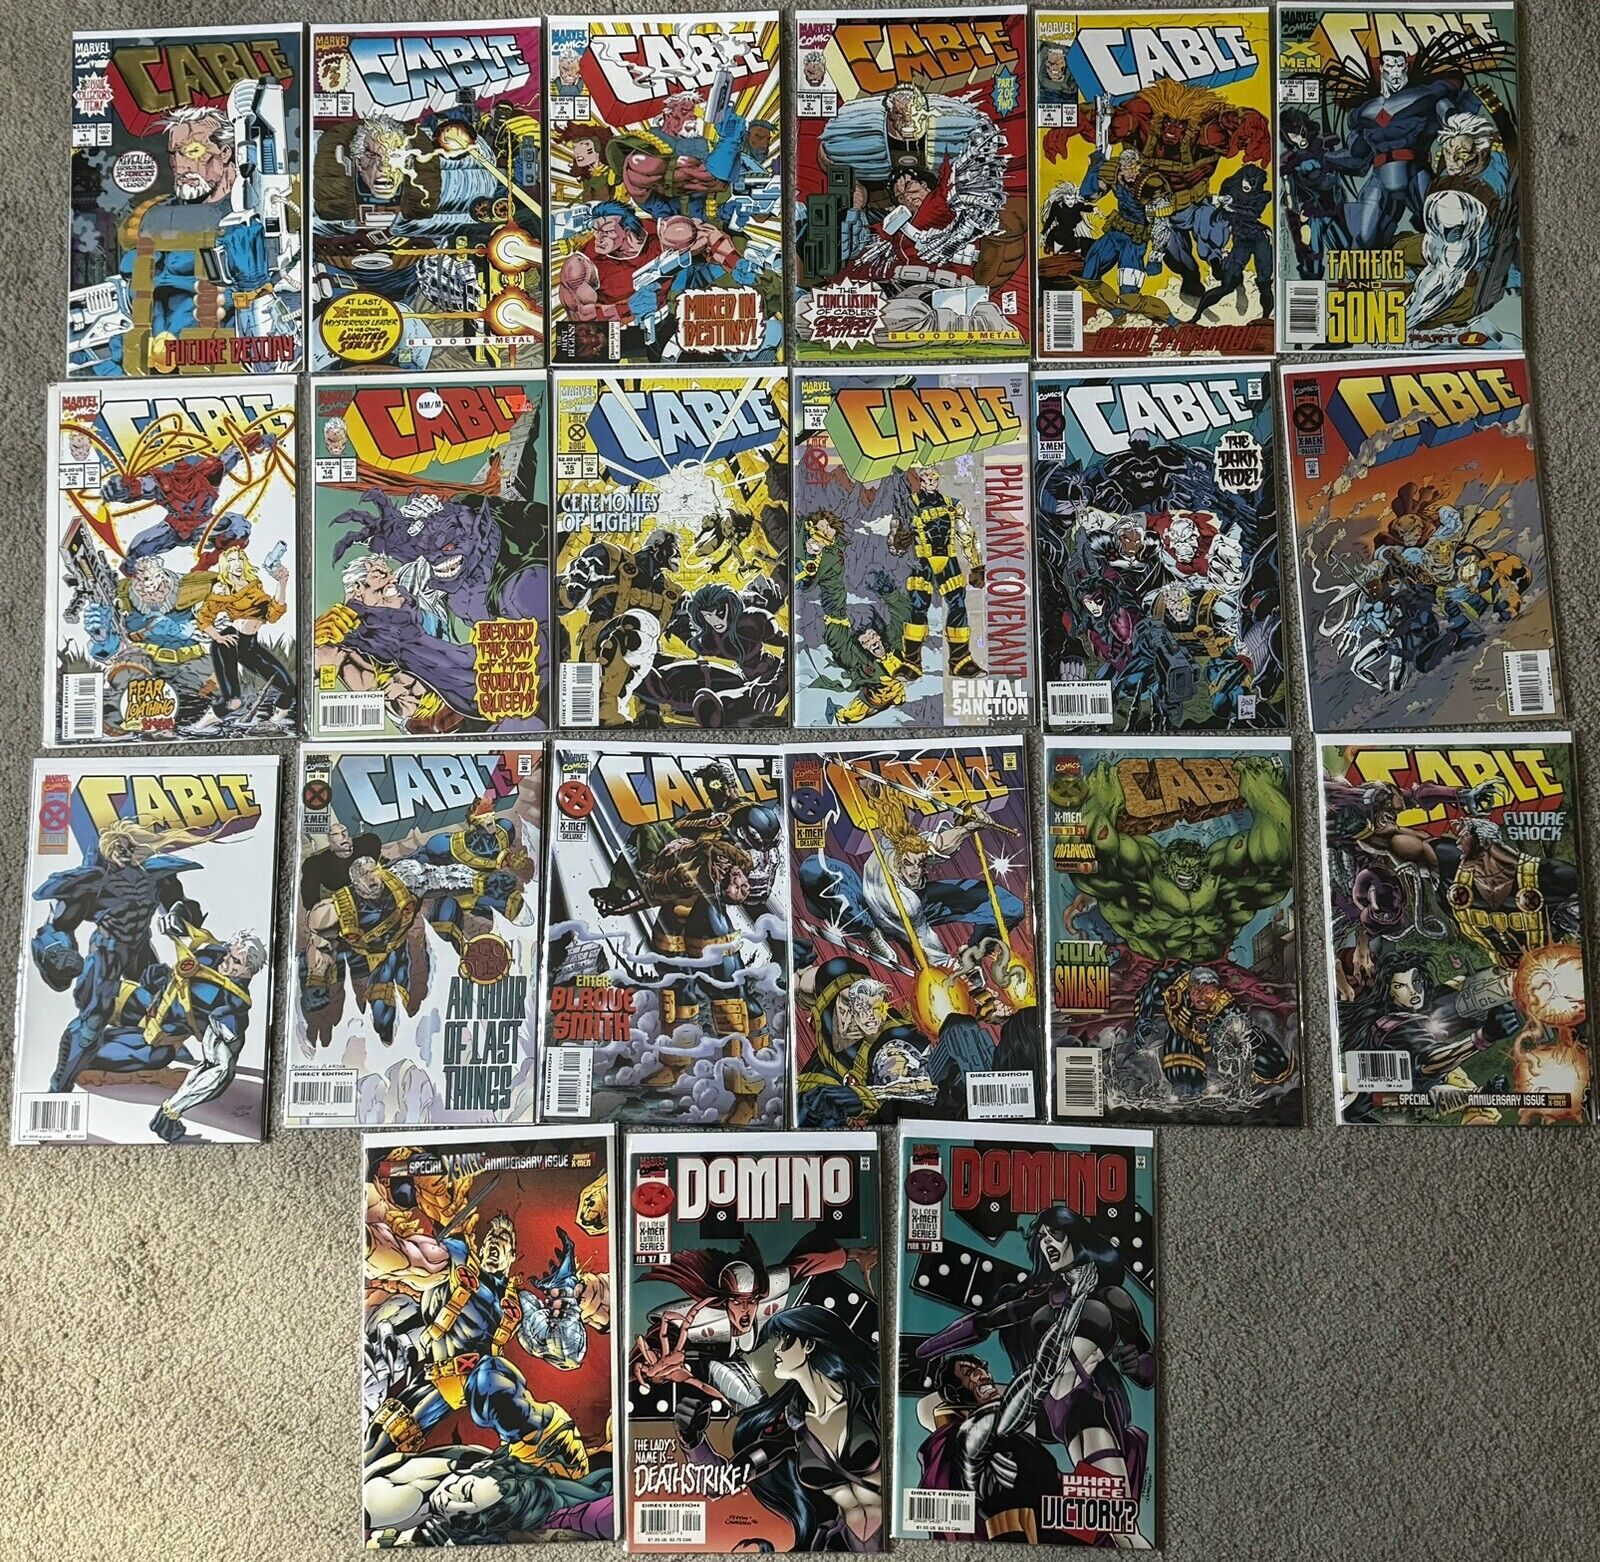 Marvel Comic Lot. Cable & X-Force. 51 Total Books. Including X-Force #1 w/card